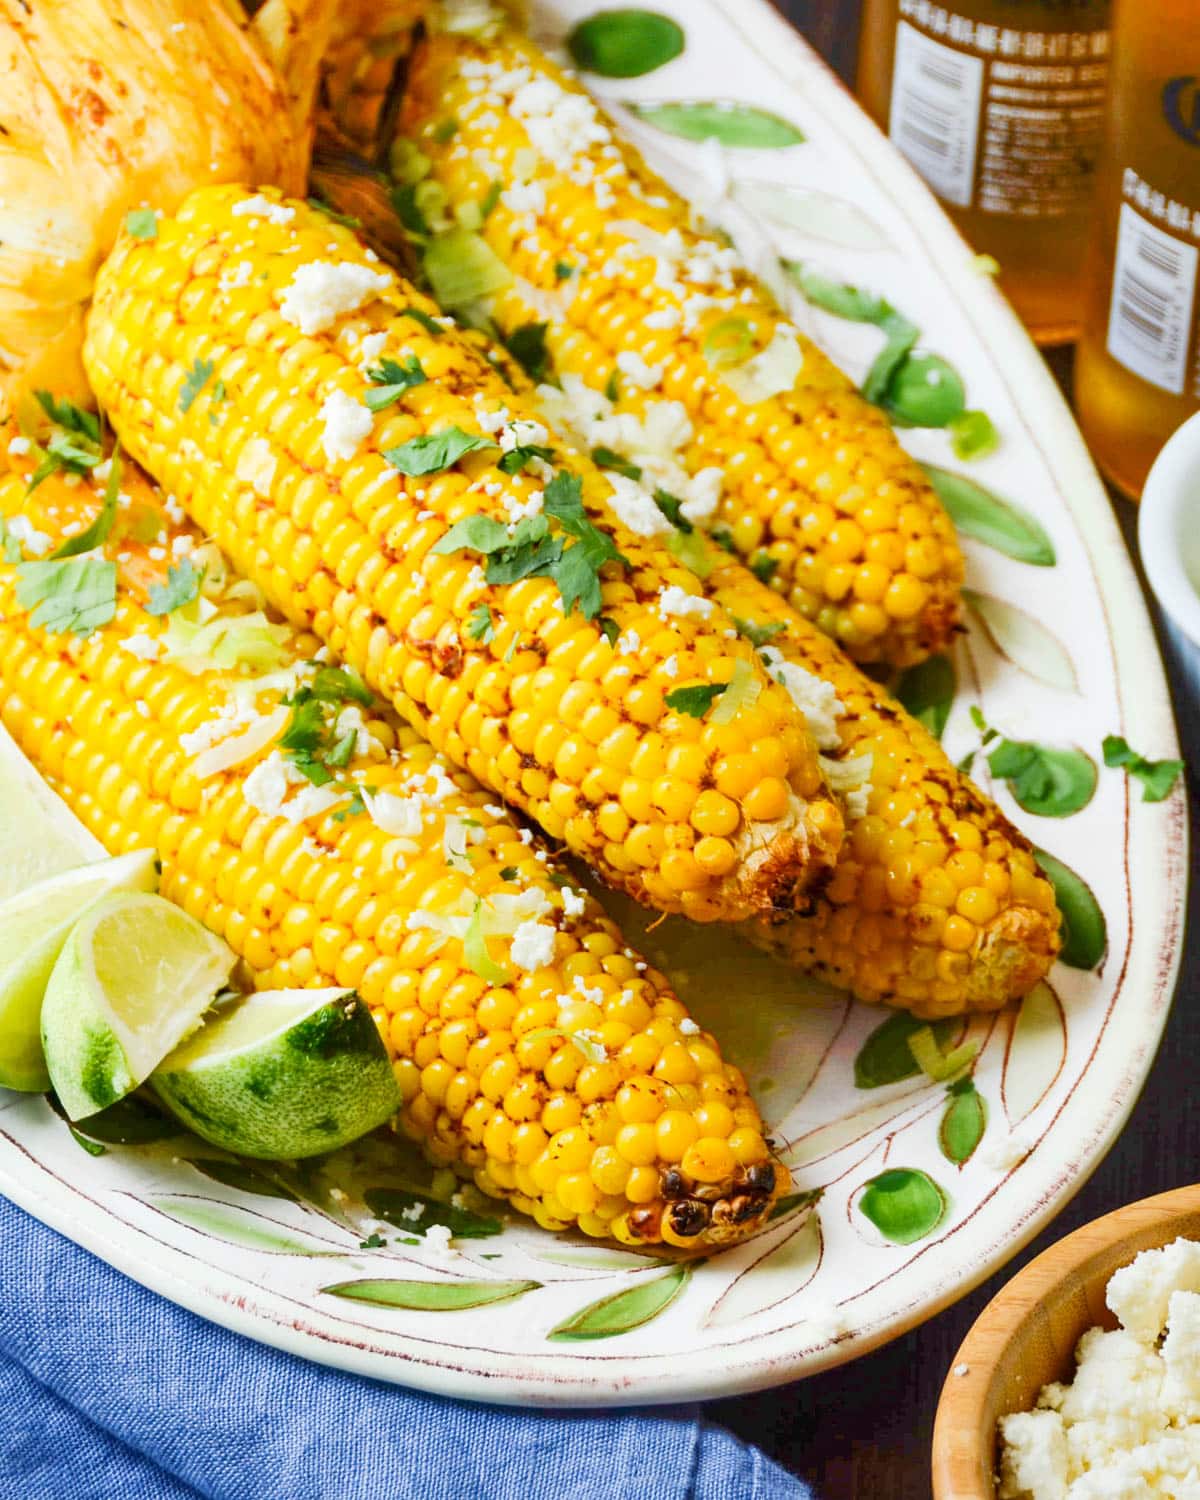 A platter of grilled corn on the cob with chipotle seasoning.